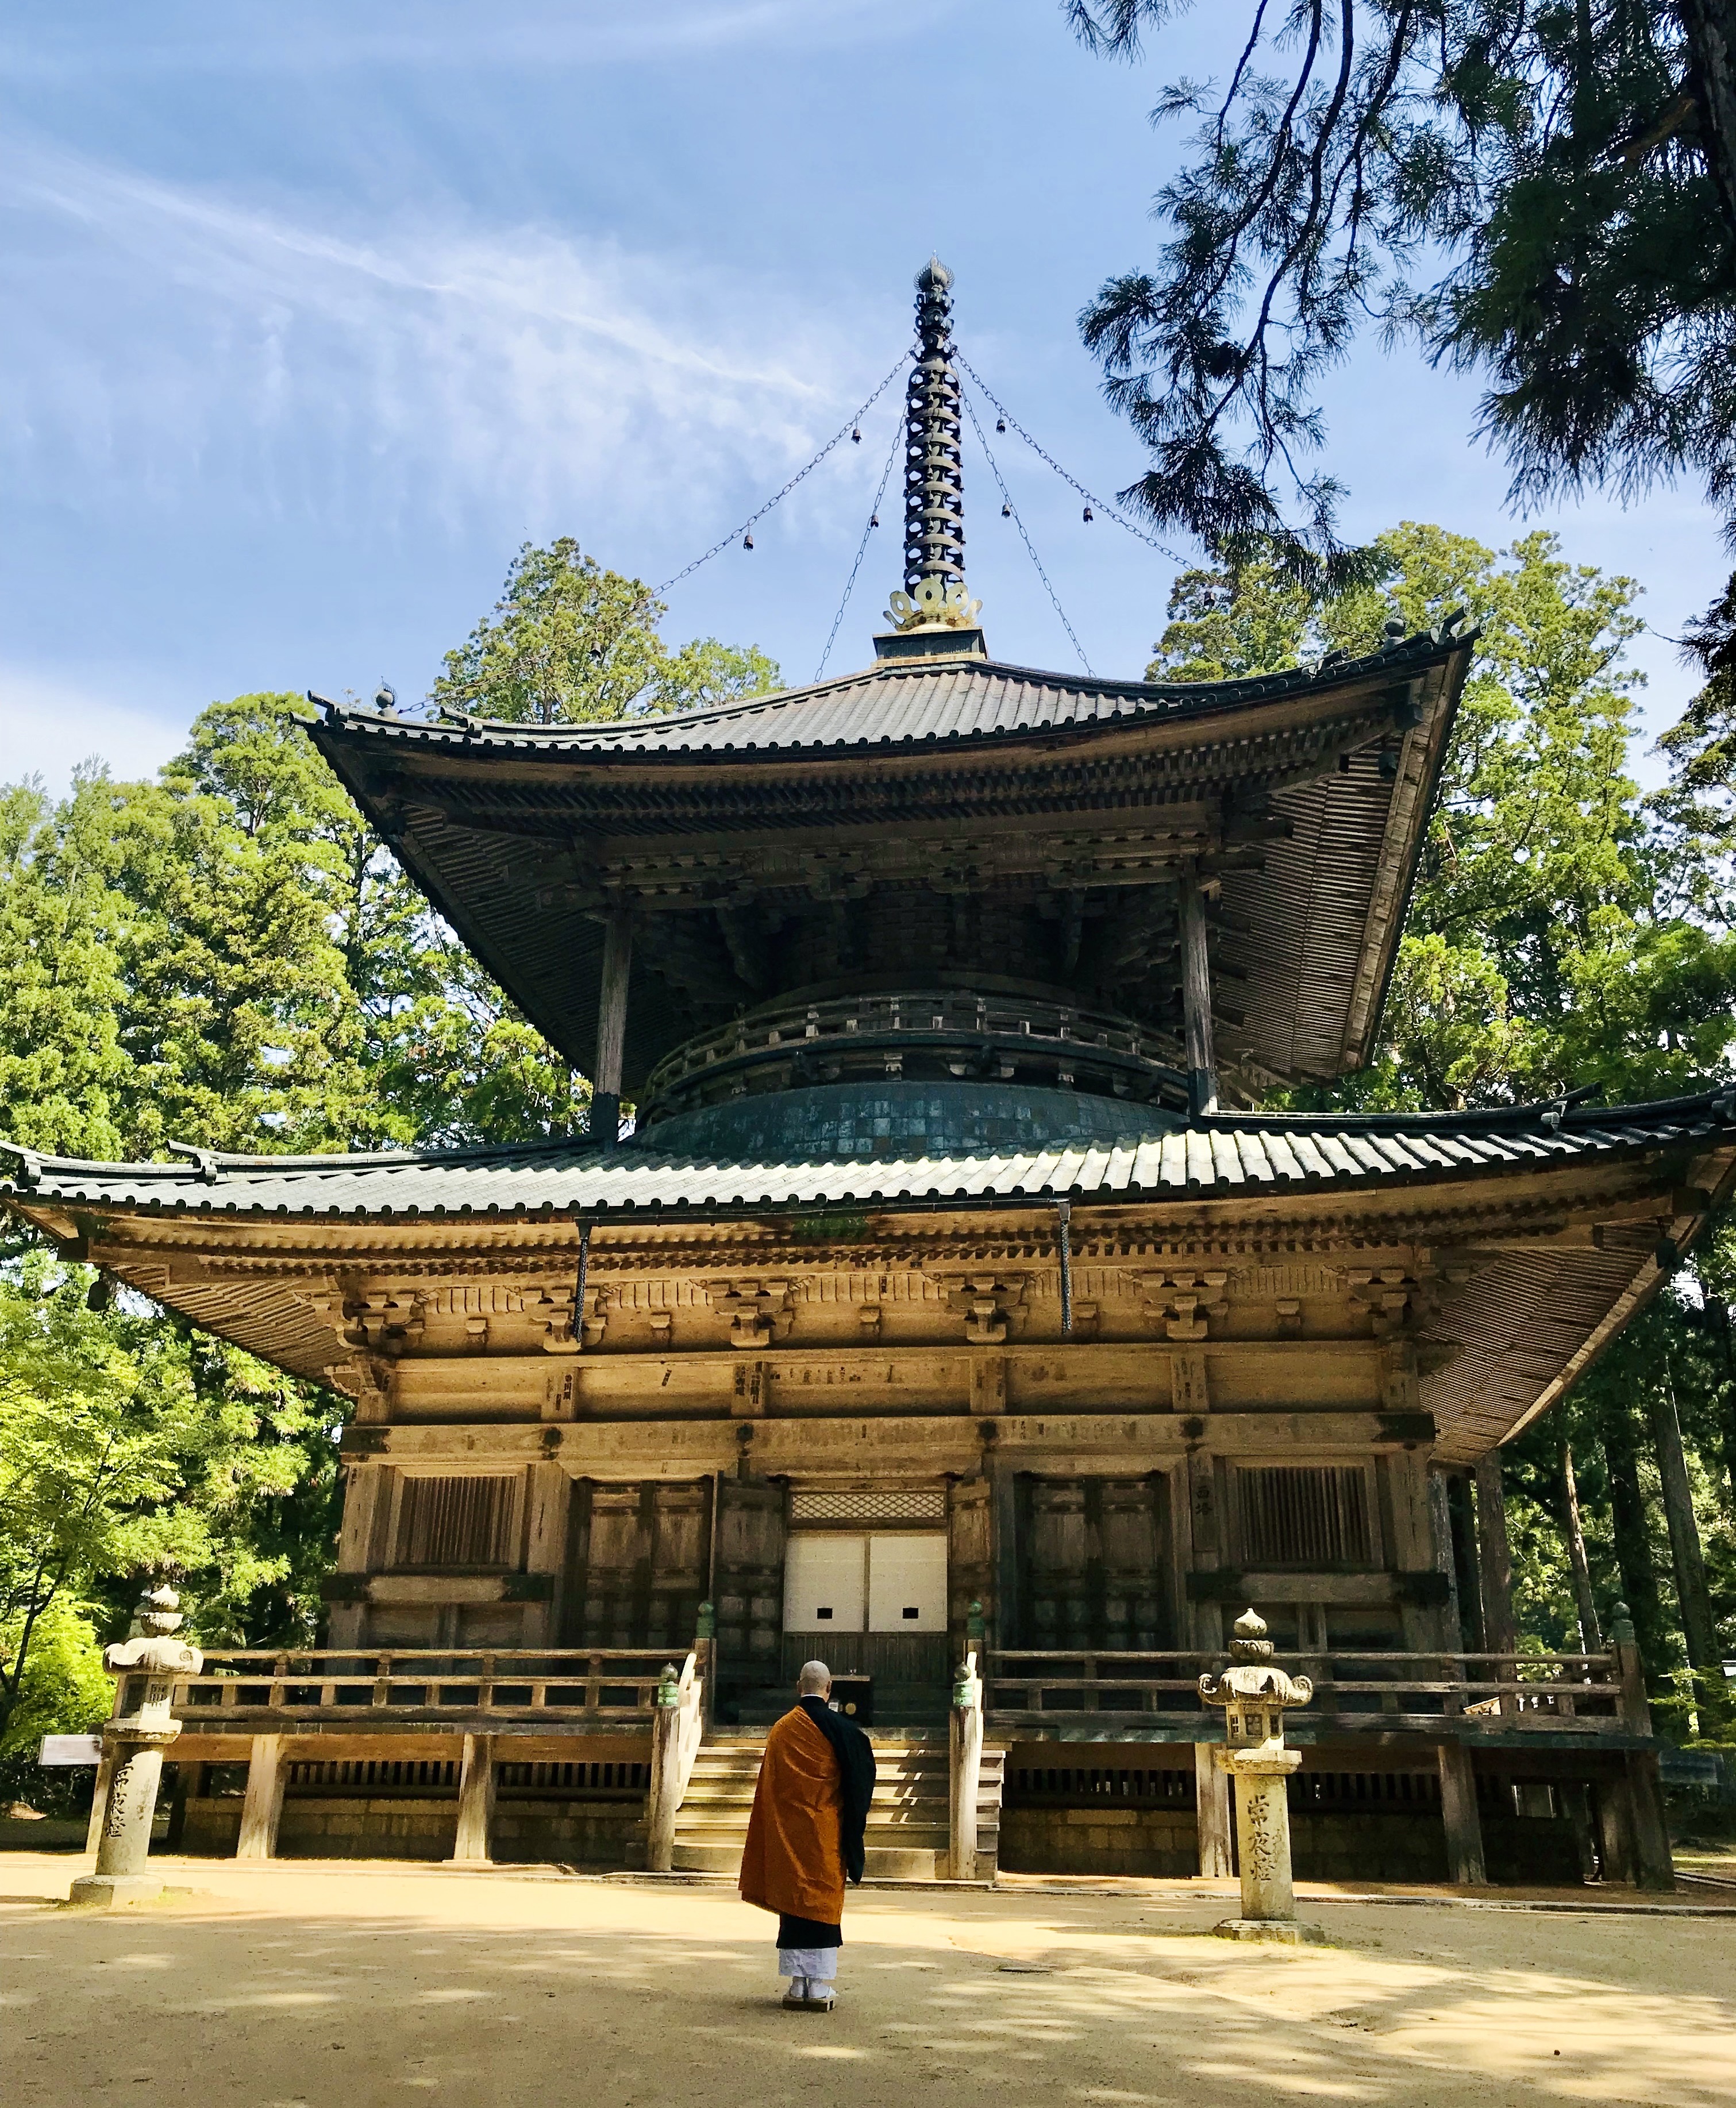 Monk standing before a two-story pagoda on Mount Koya.